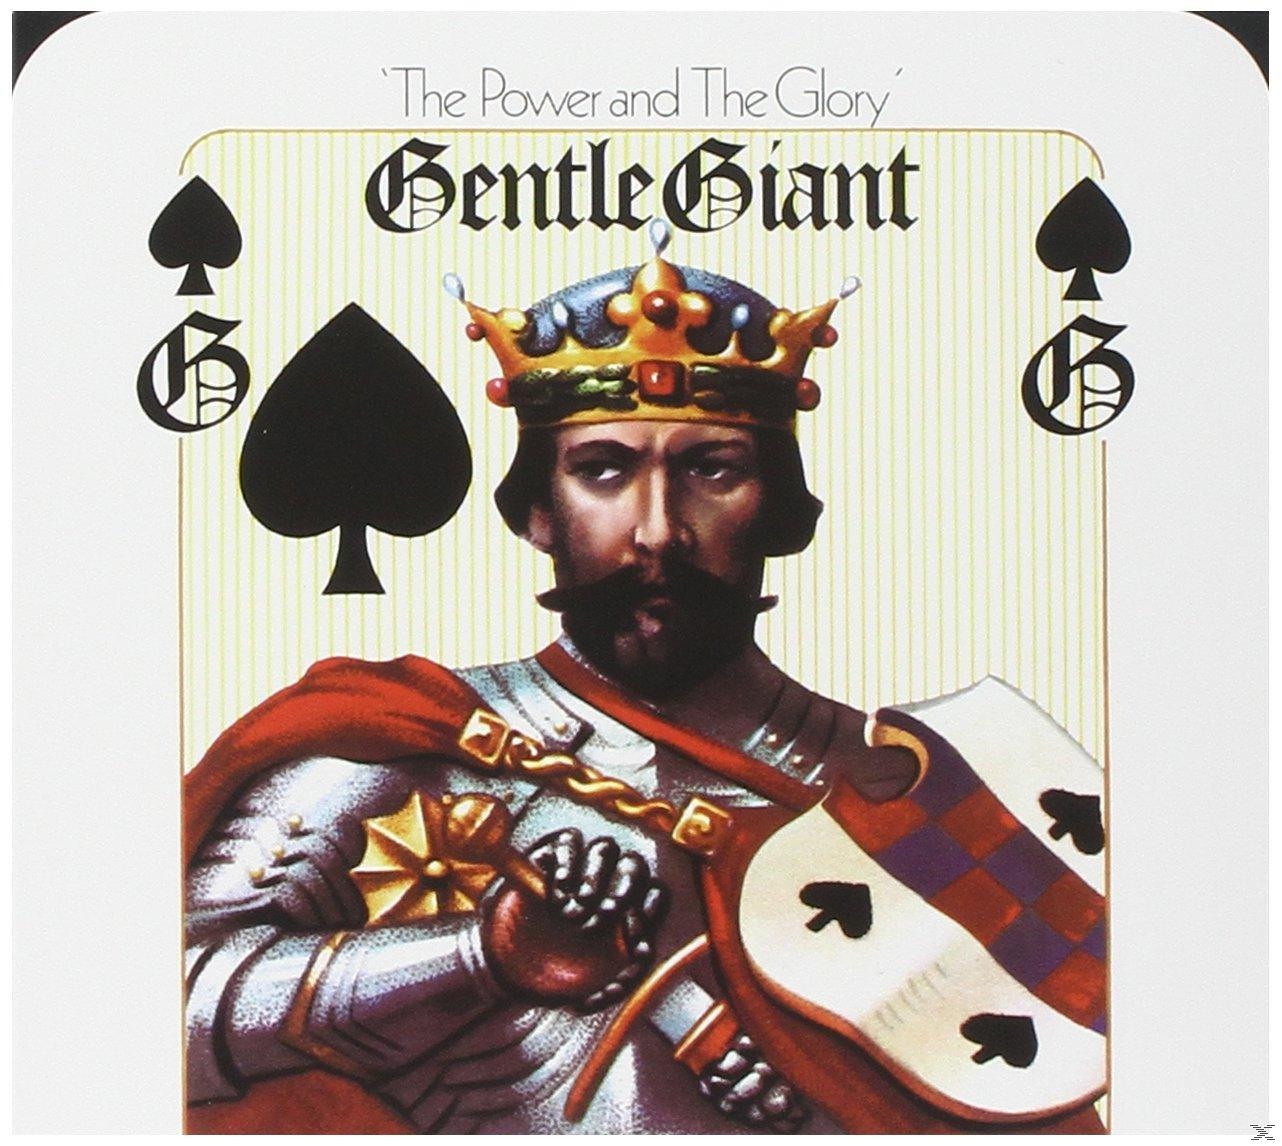 CD) Gentle Mix) & And Giant - Power Wilson (5.1 Steven Glory The 2.0 + The - (DVD